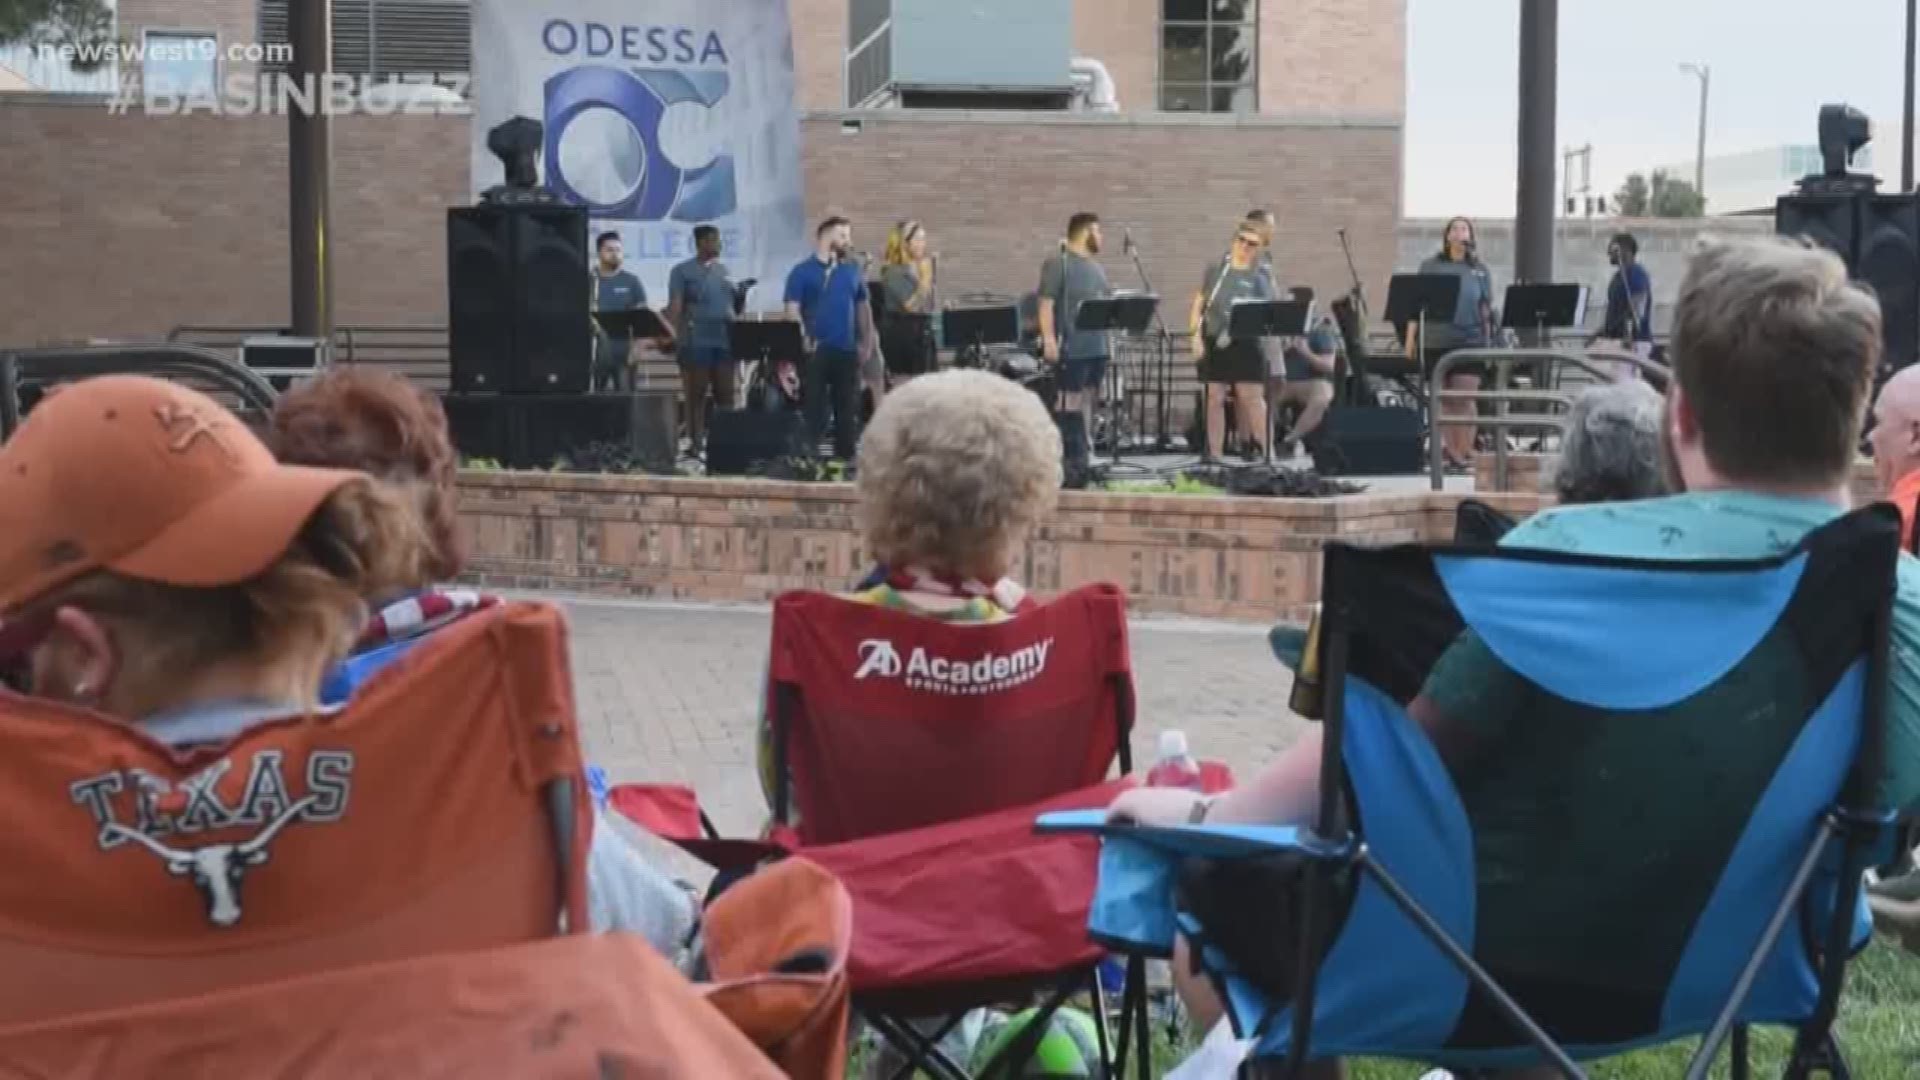 Looking for something to do this weekend? NewsWest 9 has all the fun and exciting stuff for you AND your family to experience June 21 through June 23.